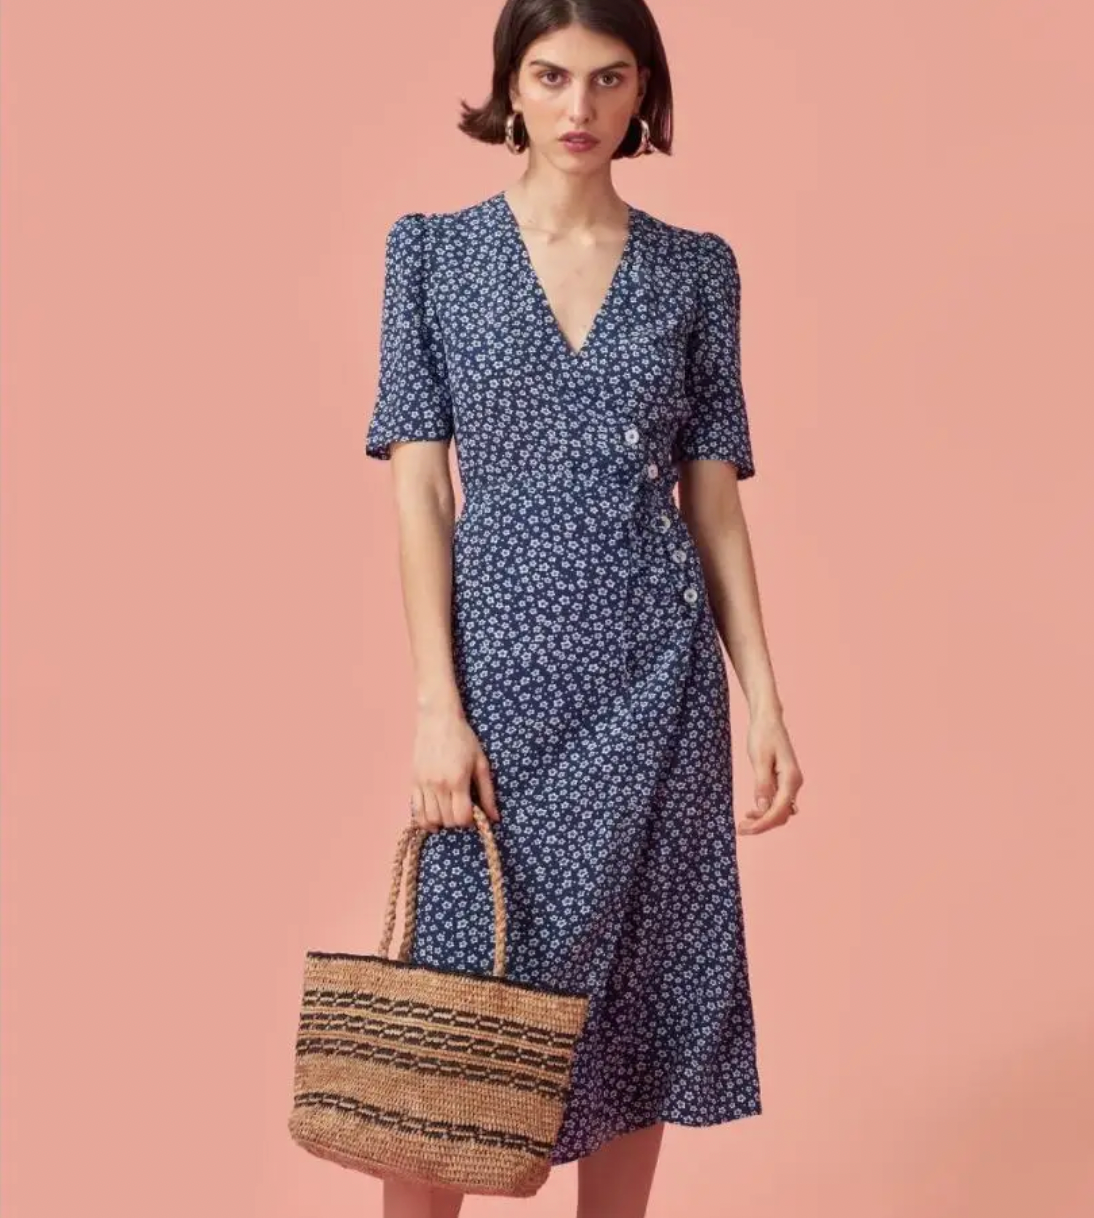 Indulge in the elegance of the Eloise Dress. Made with lightweight cotton, this floral-printed dress boasts a relaxed fit and short sleeves for effortless style. Perfect for any occasion, experience the luxury of comfort and beauty in one.